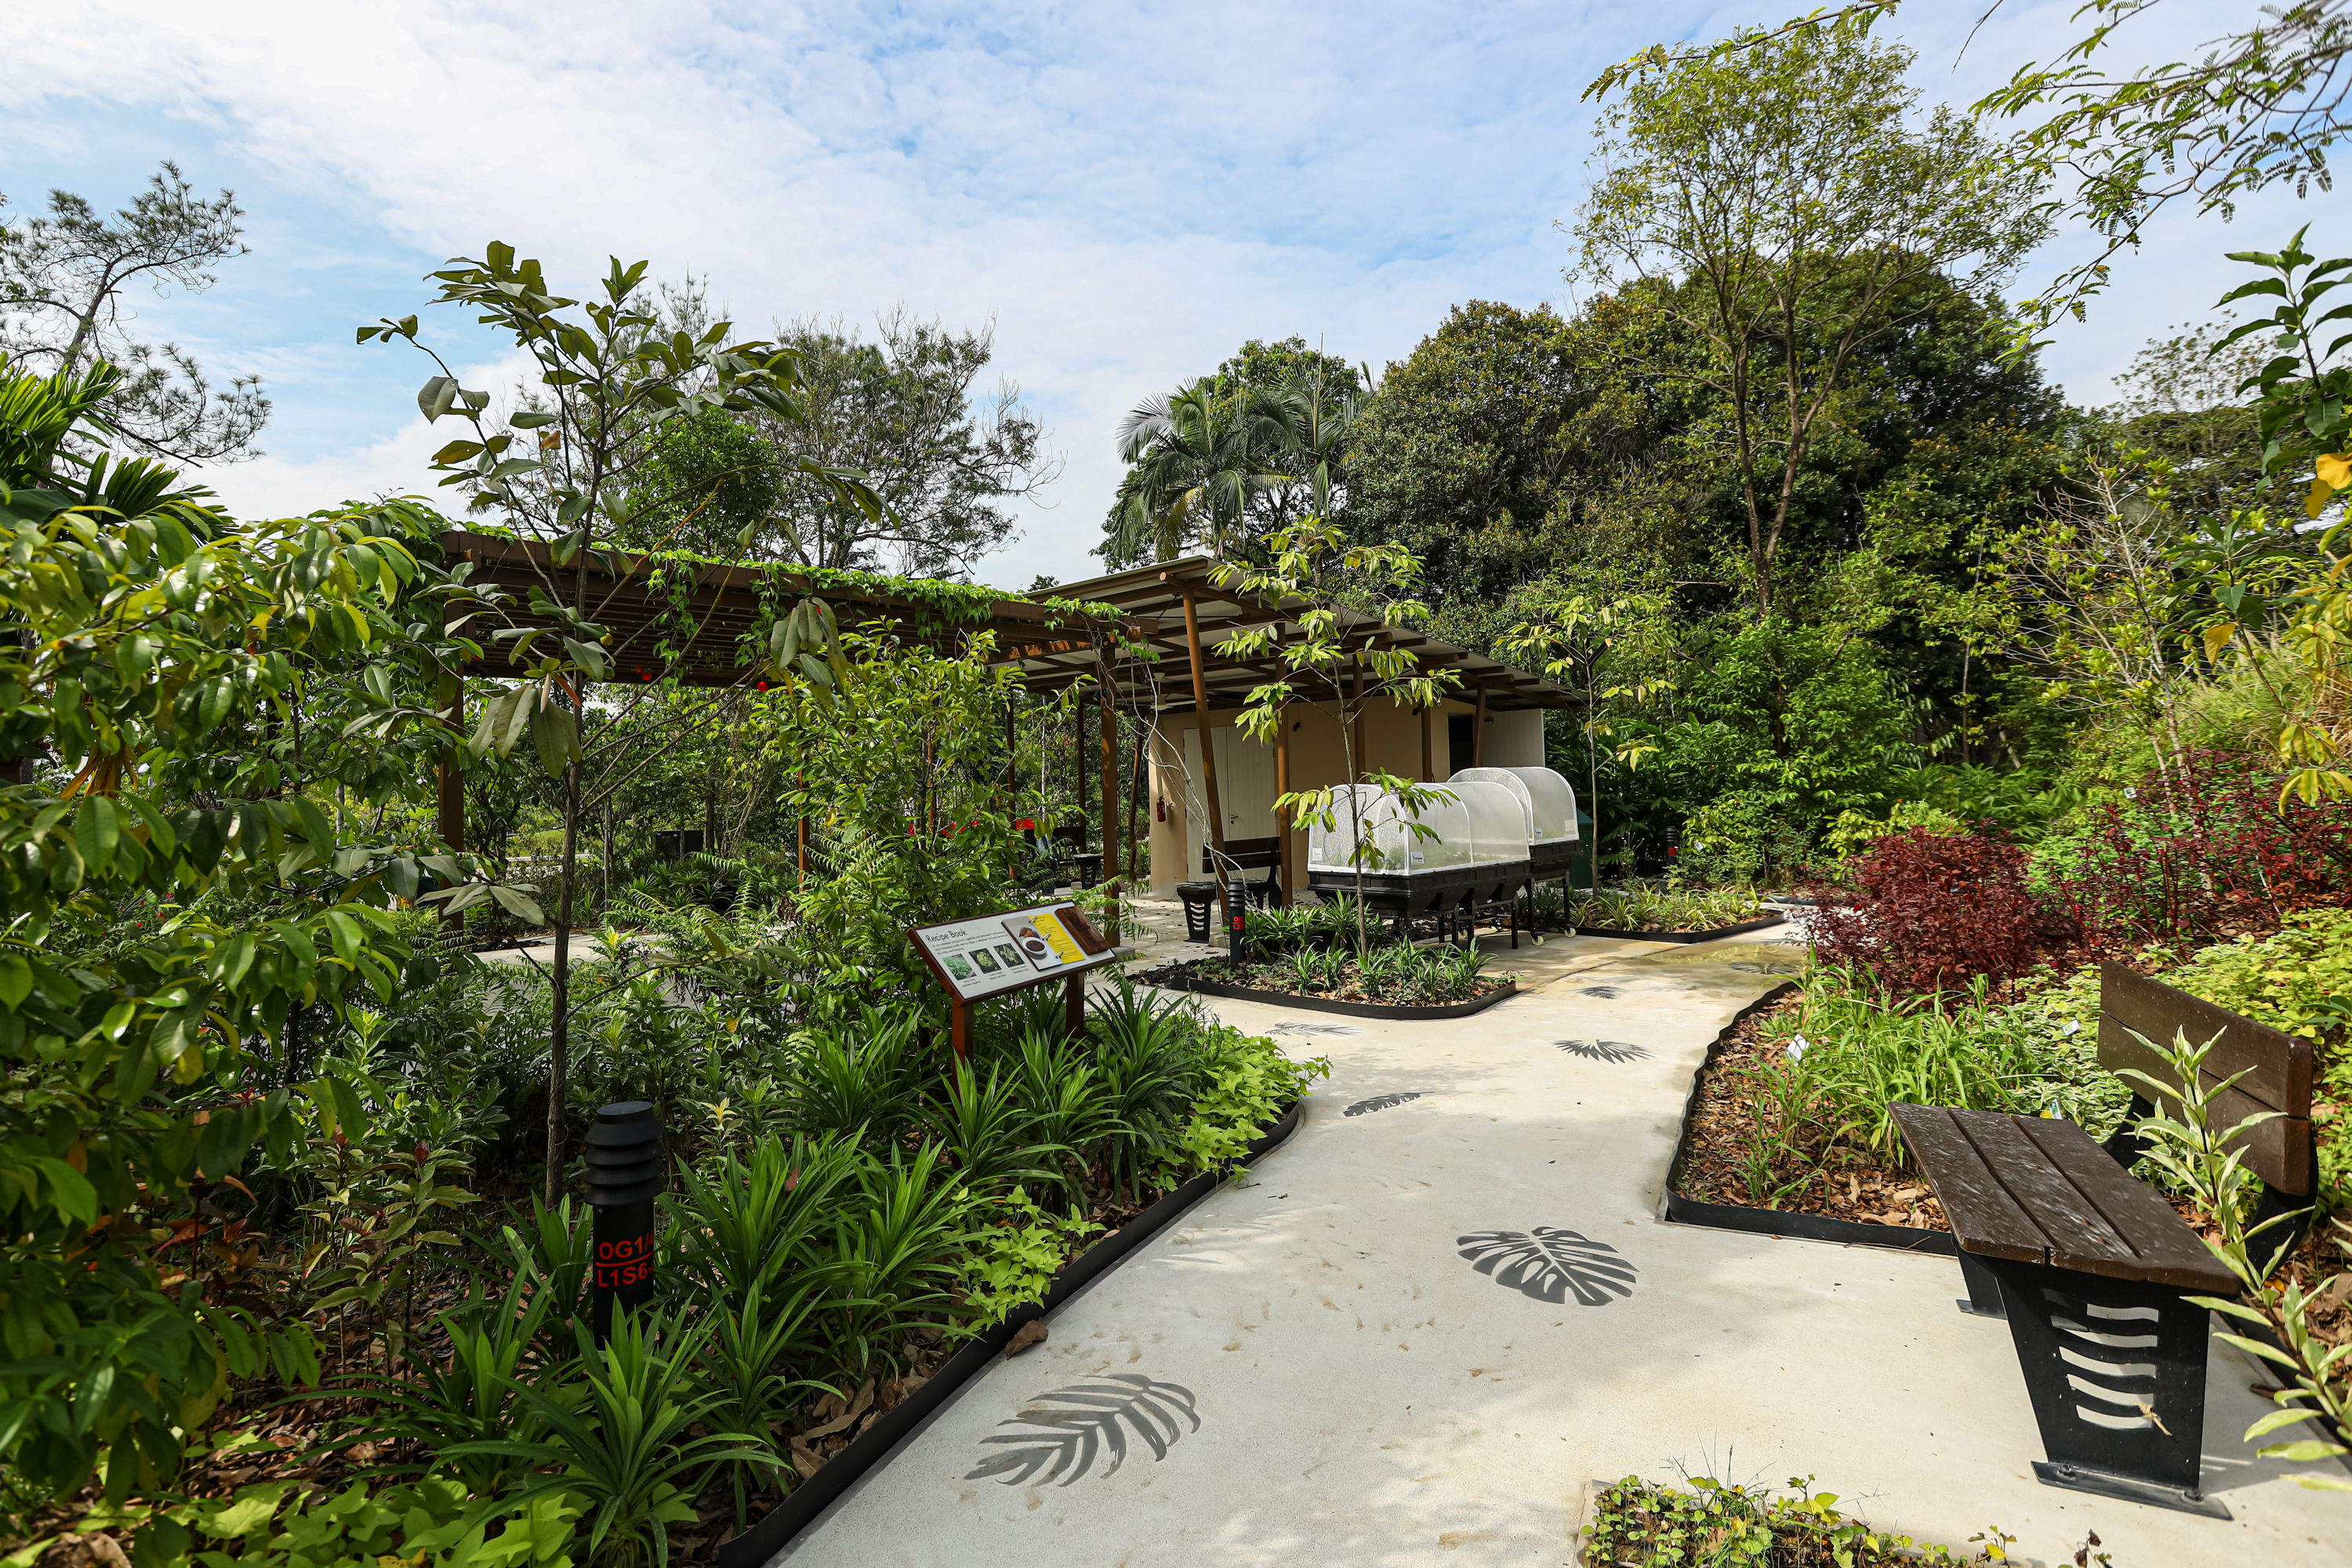 Therapeutic Garden by NParks at Jurong Lake Garden. Image courtesy of NParks